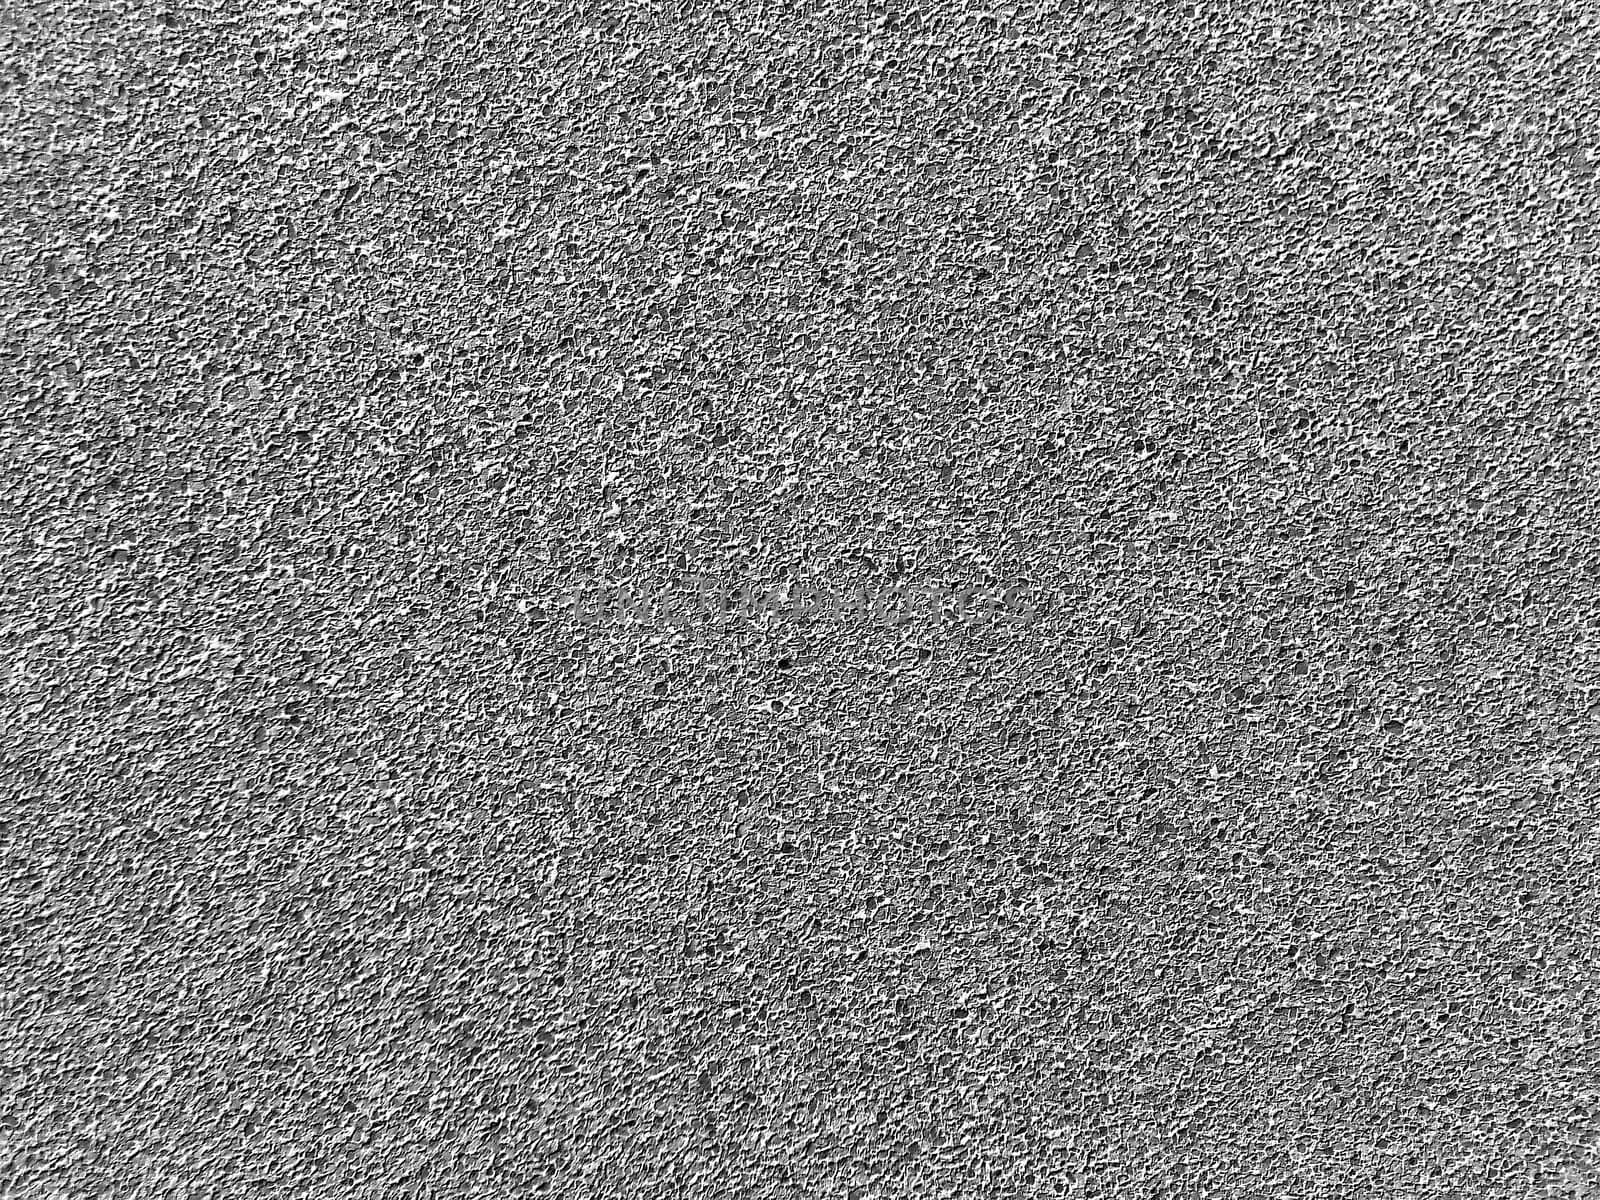 fine-grained texture of grey wall by Krakatuk